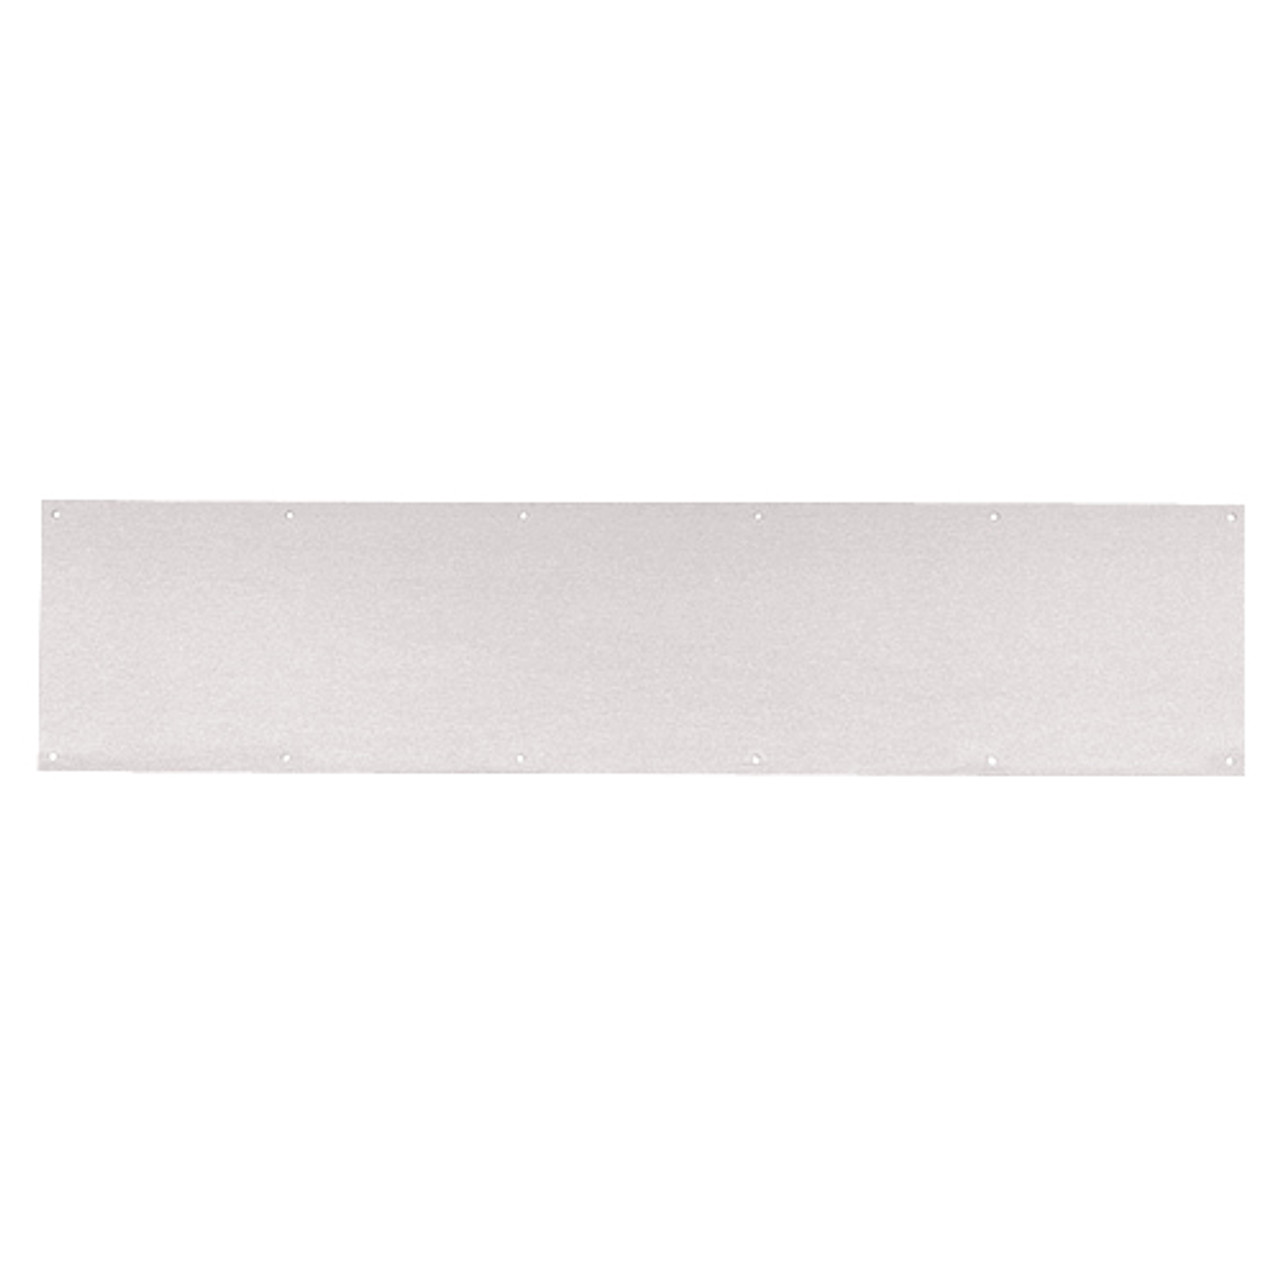 8400-US32-8x46-B-CS Ives 8400 Series Protection Plate in Bright Stainless Steel